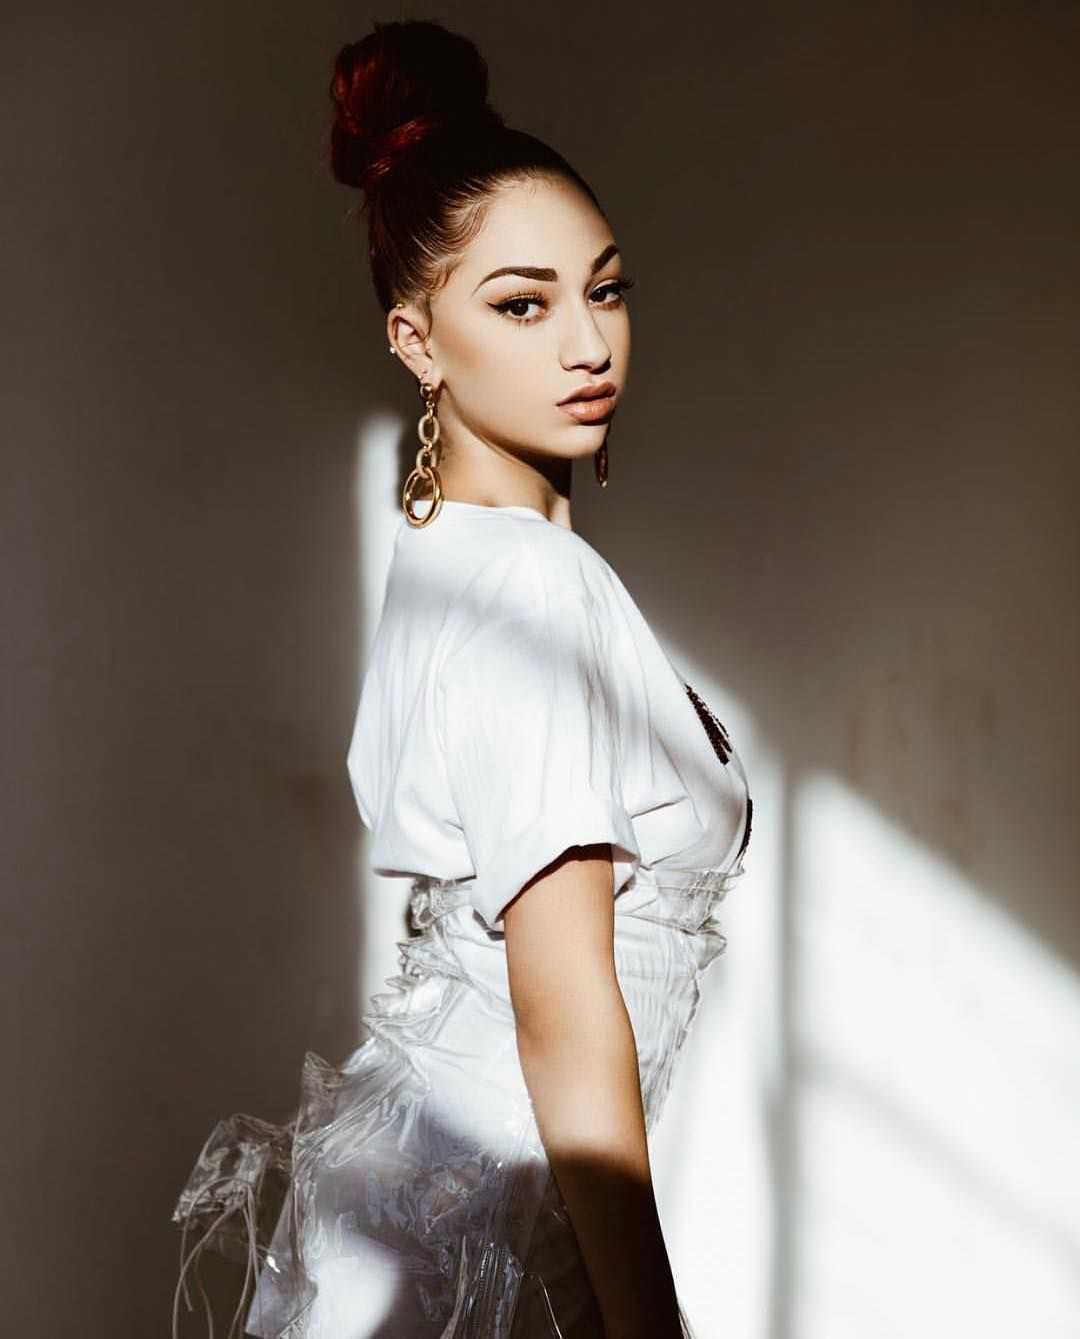 70+ Hot Pictures Of Danielle Bregoli aka Bhad Bhabie Which Will Win Your Heart 23